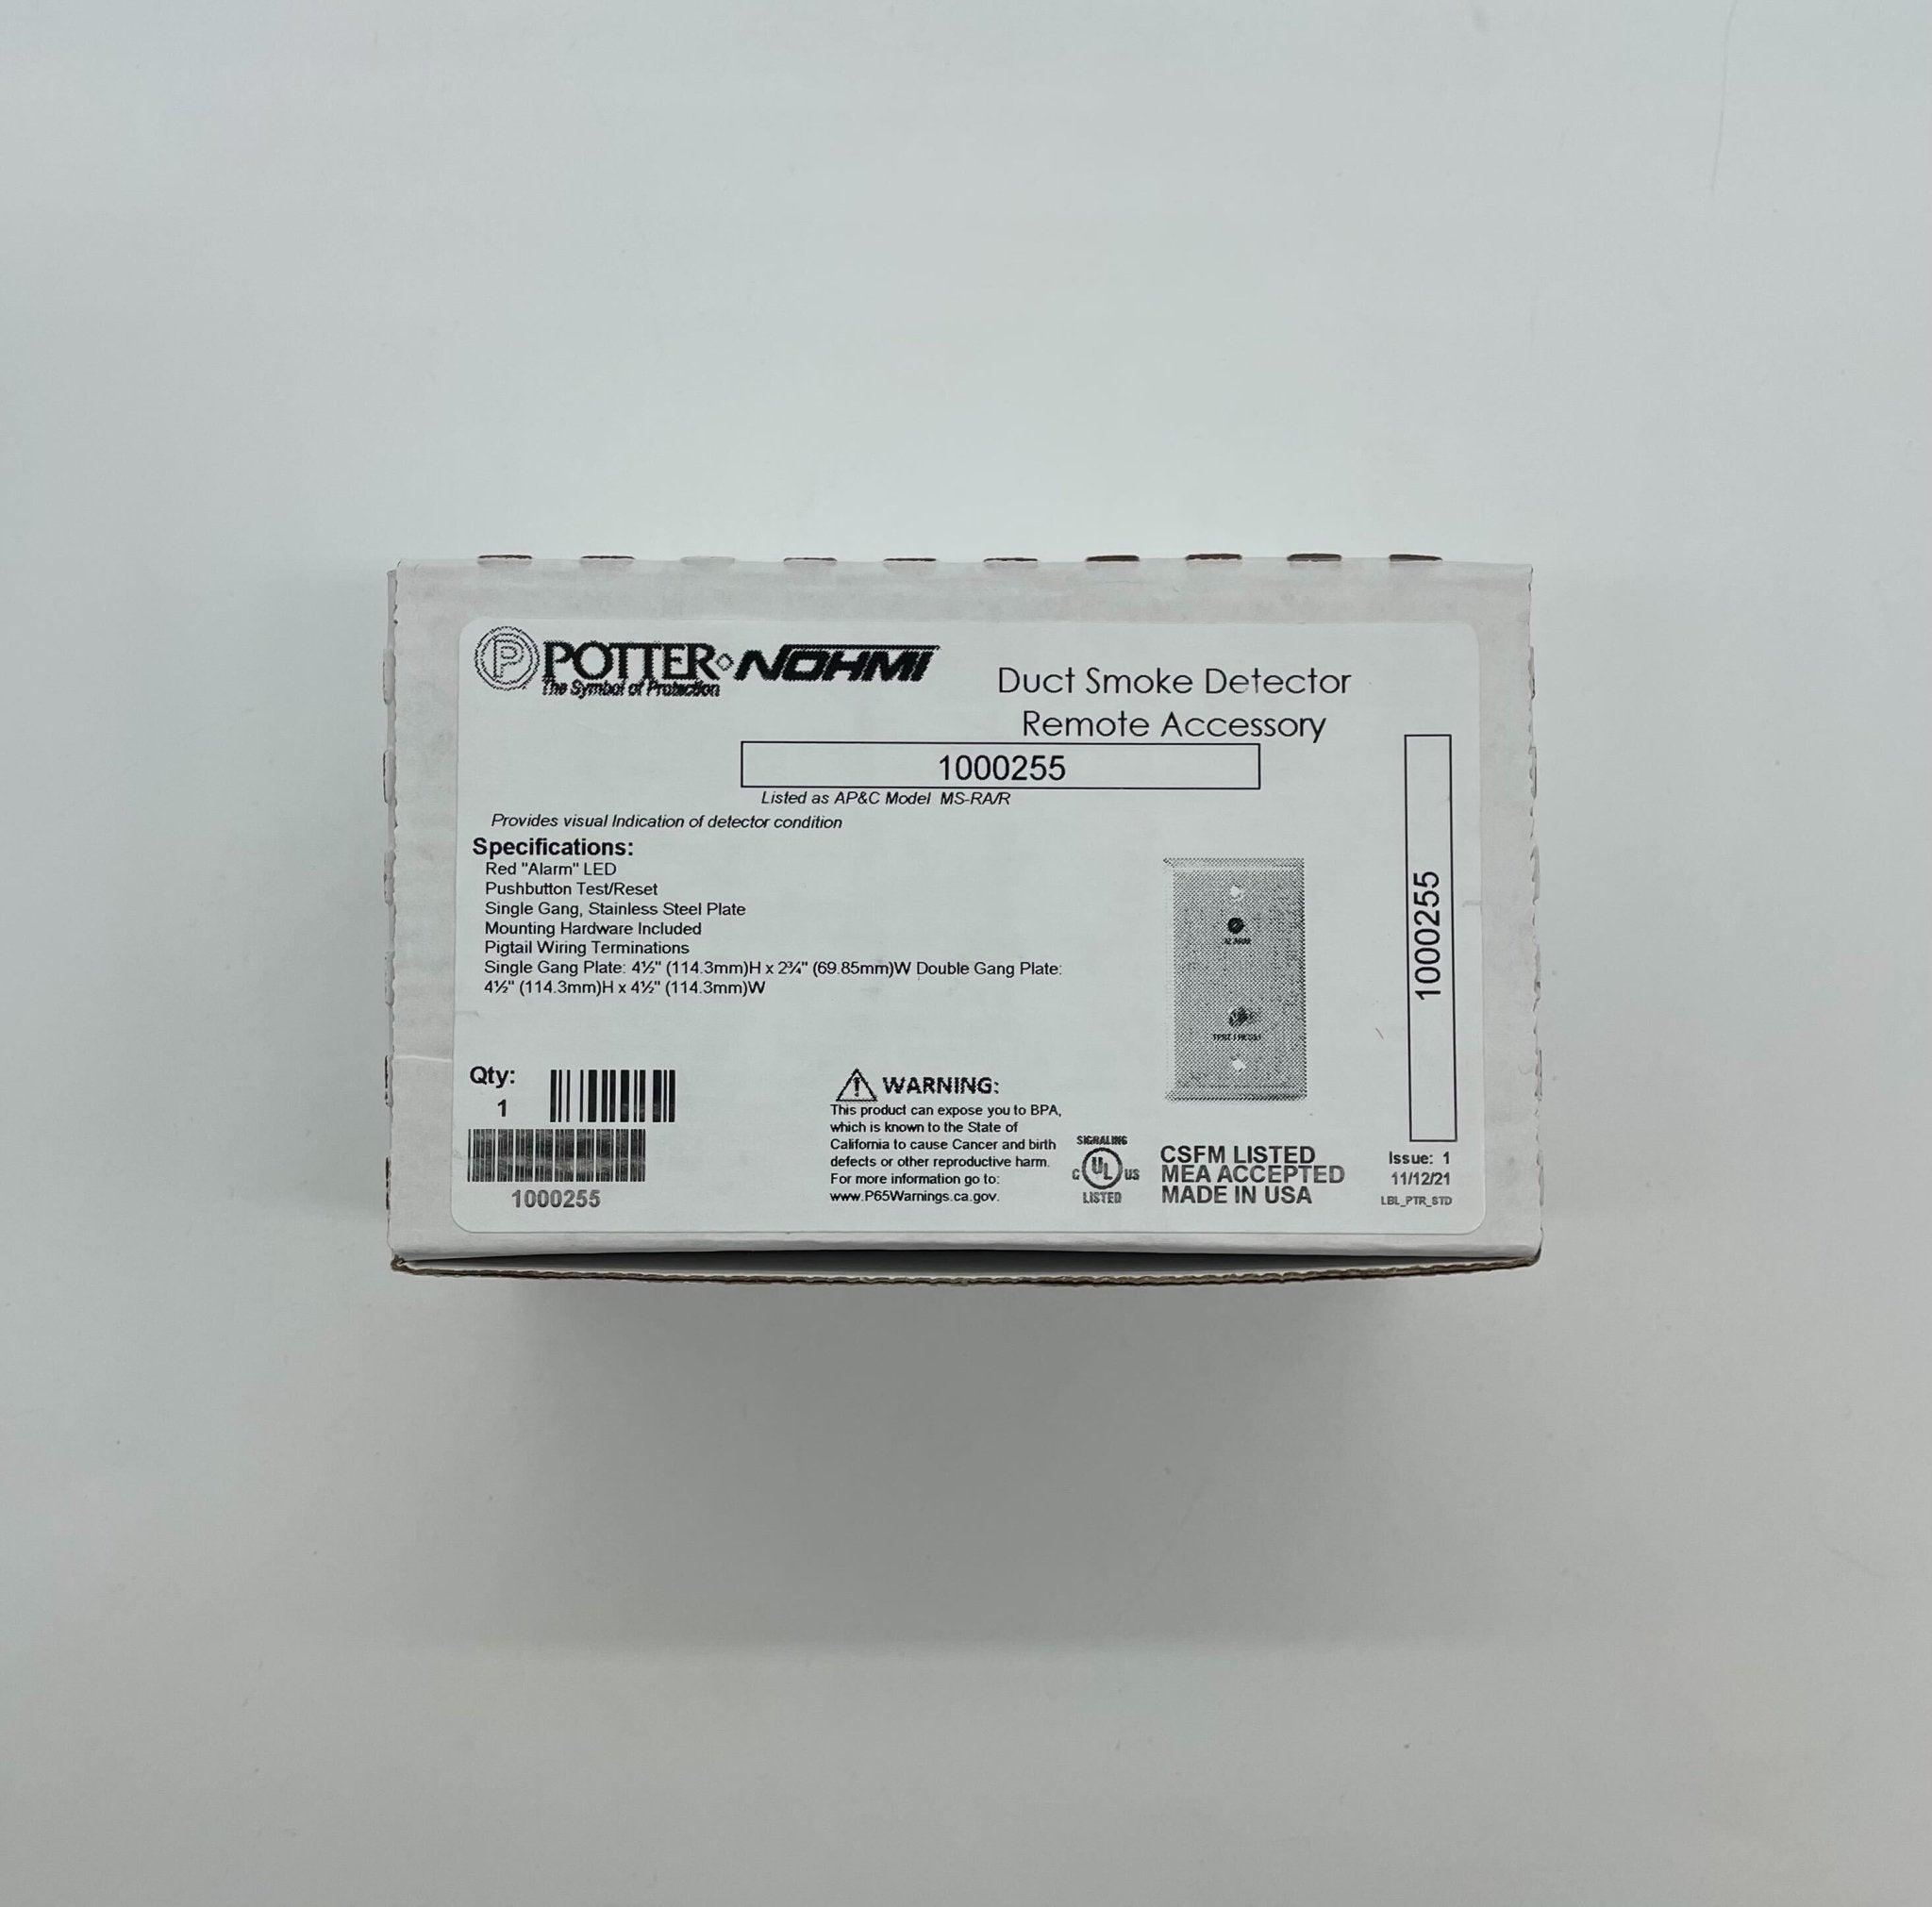 Potter MS-RA/R - The Fire Alarm Supplier